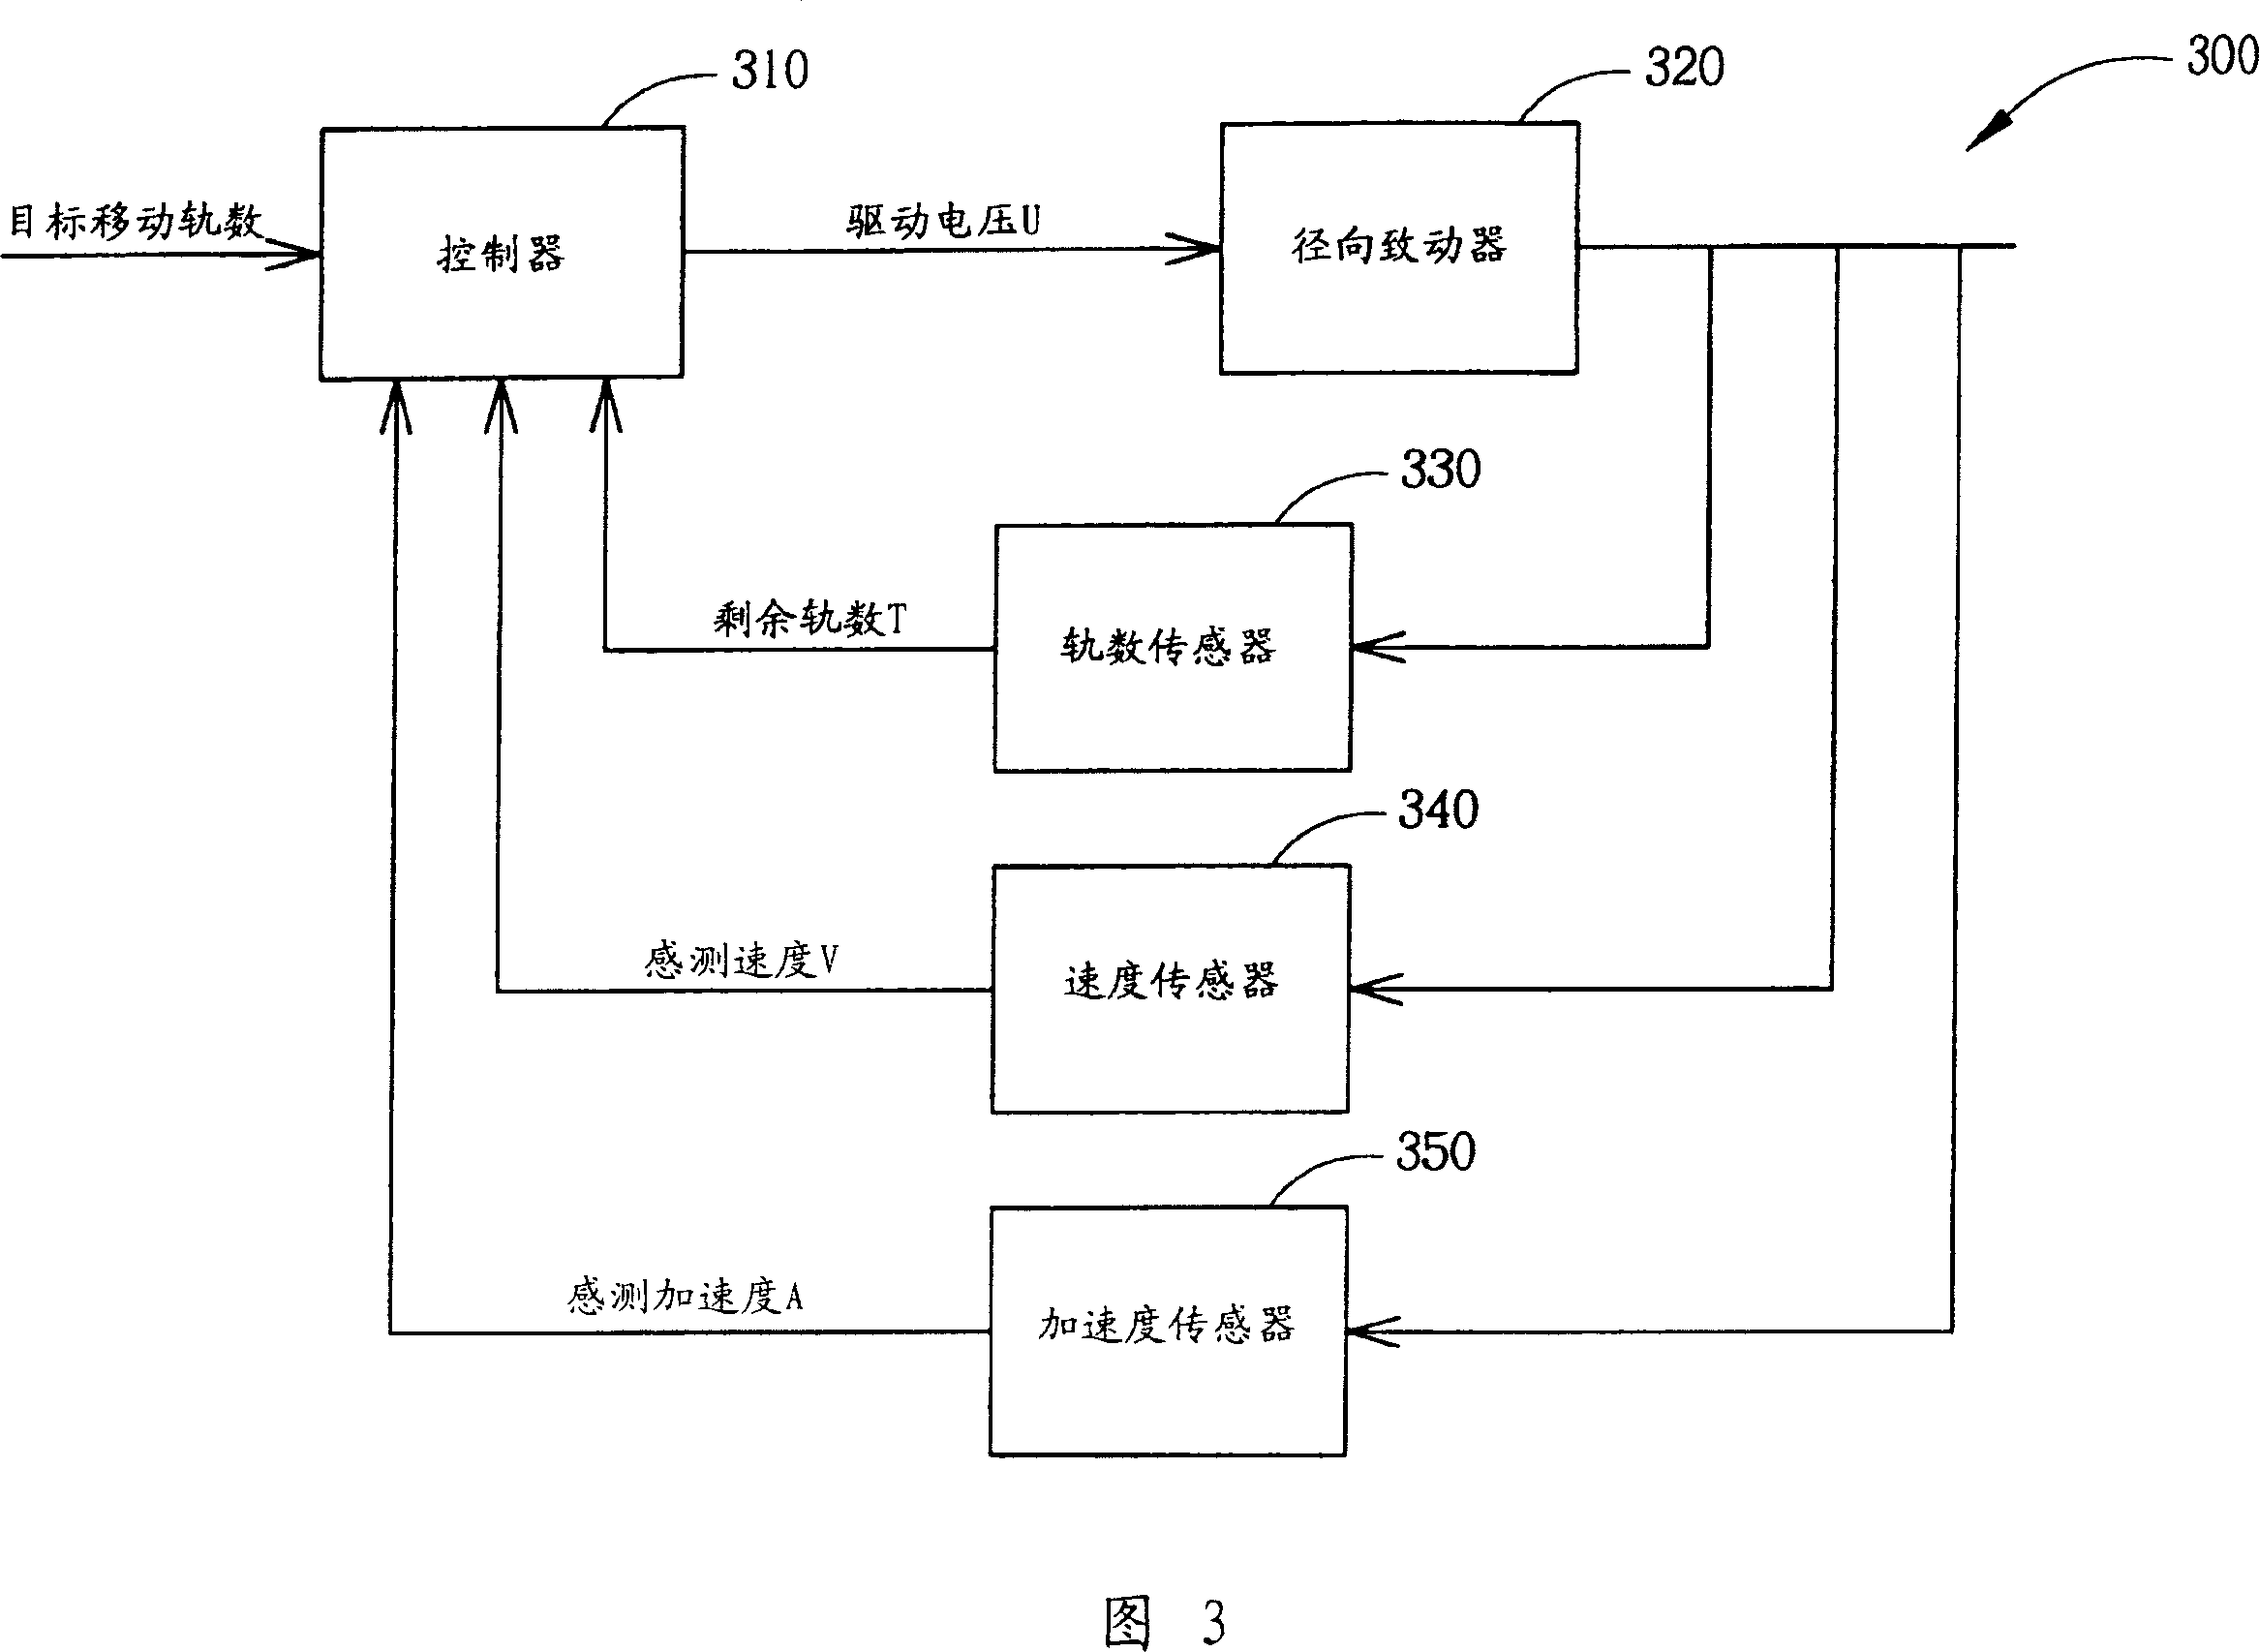 Long-distance trace seeking and control method for CD driver and related system structure